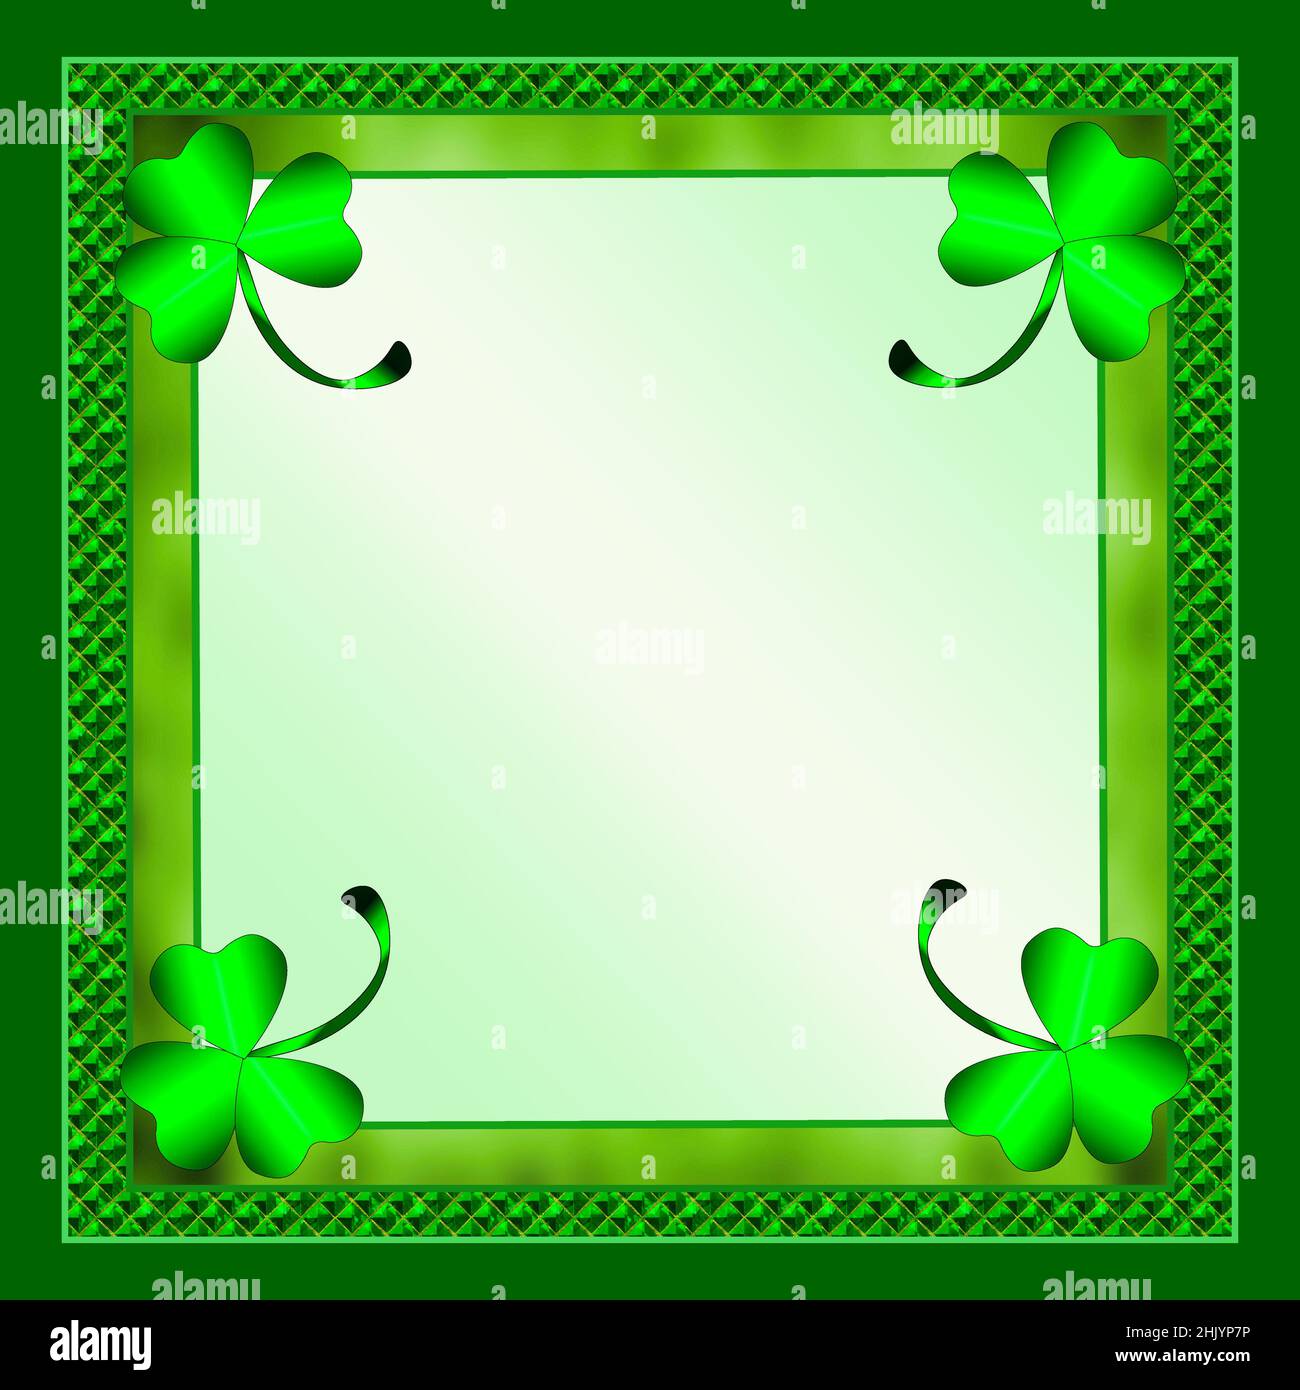 St. Patrick's Day Square Background with Bright Large Shamrocks and Fancy green patterned borders. Stock Photo